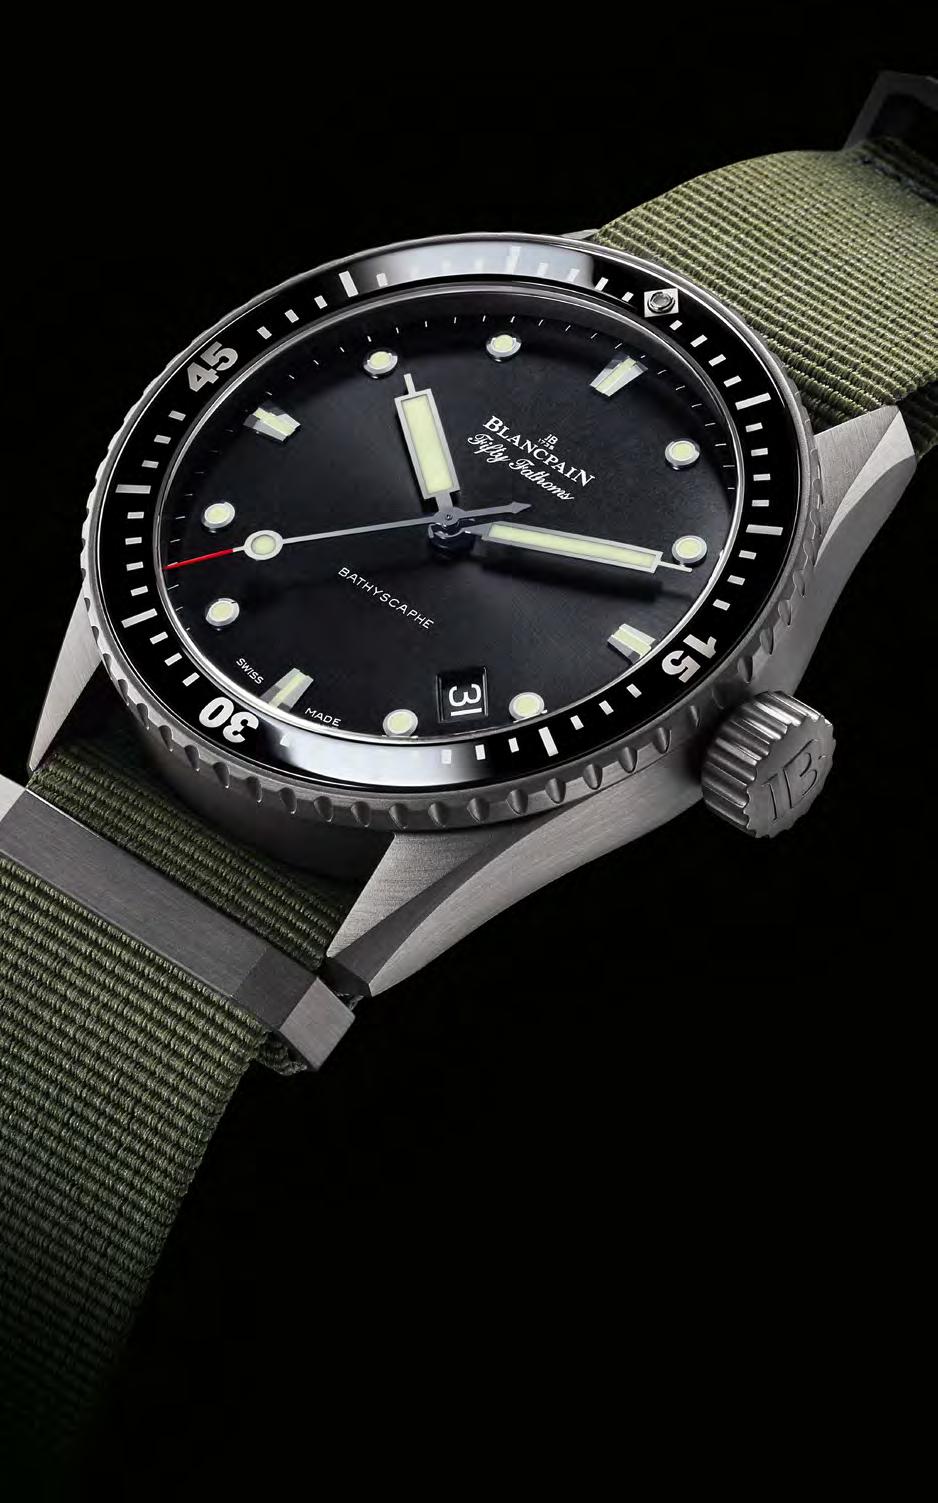 BATHYSCAPHE 5000-1230-B52 A CALIBRE 1315 5-day power reserve Date and seconds Black dial Unidirectional satin-brushed titanium bezel with